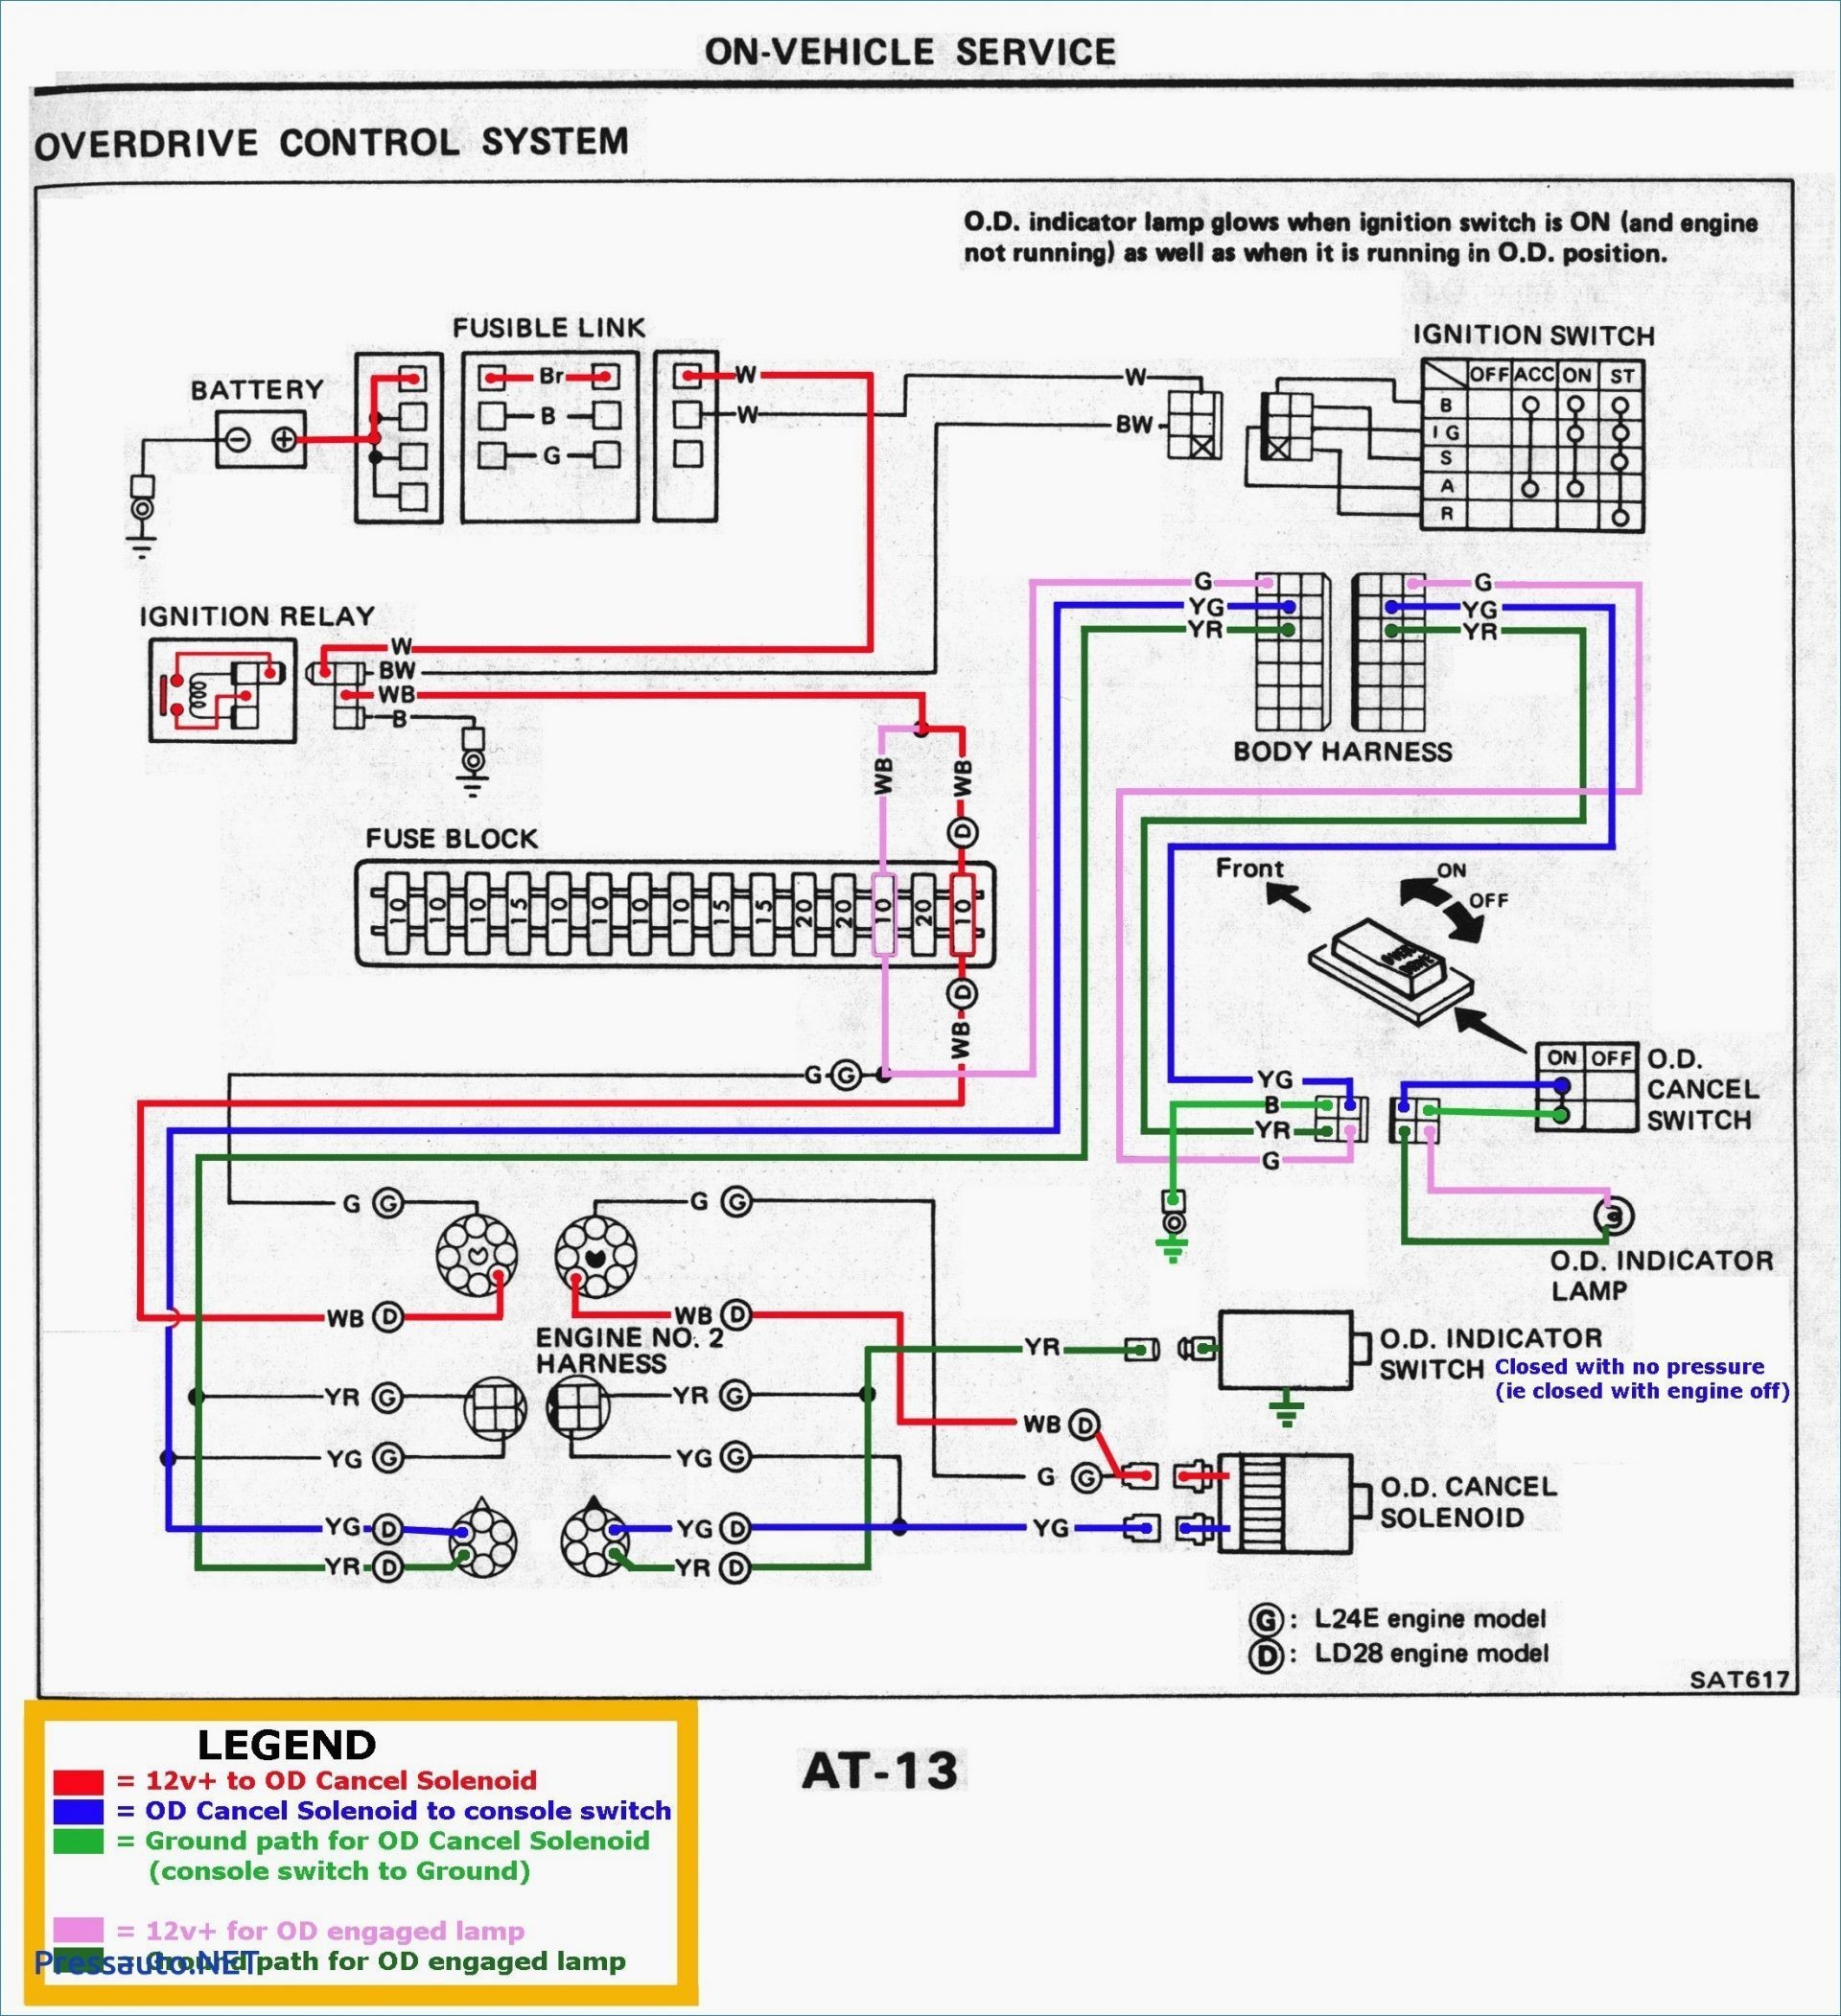 Wiring Diagram for Installing Driving Lights Best Wiring Diagram Led Light Bar Archives Joescablecar Print